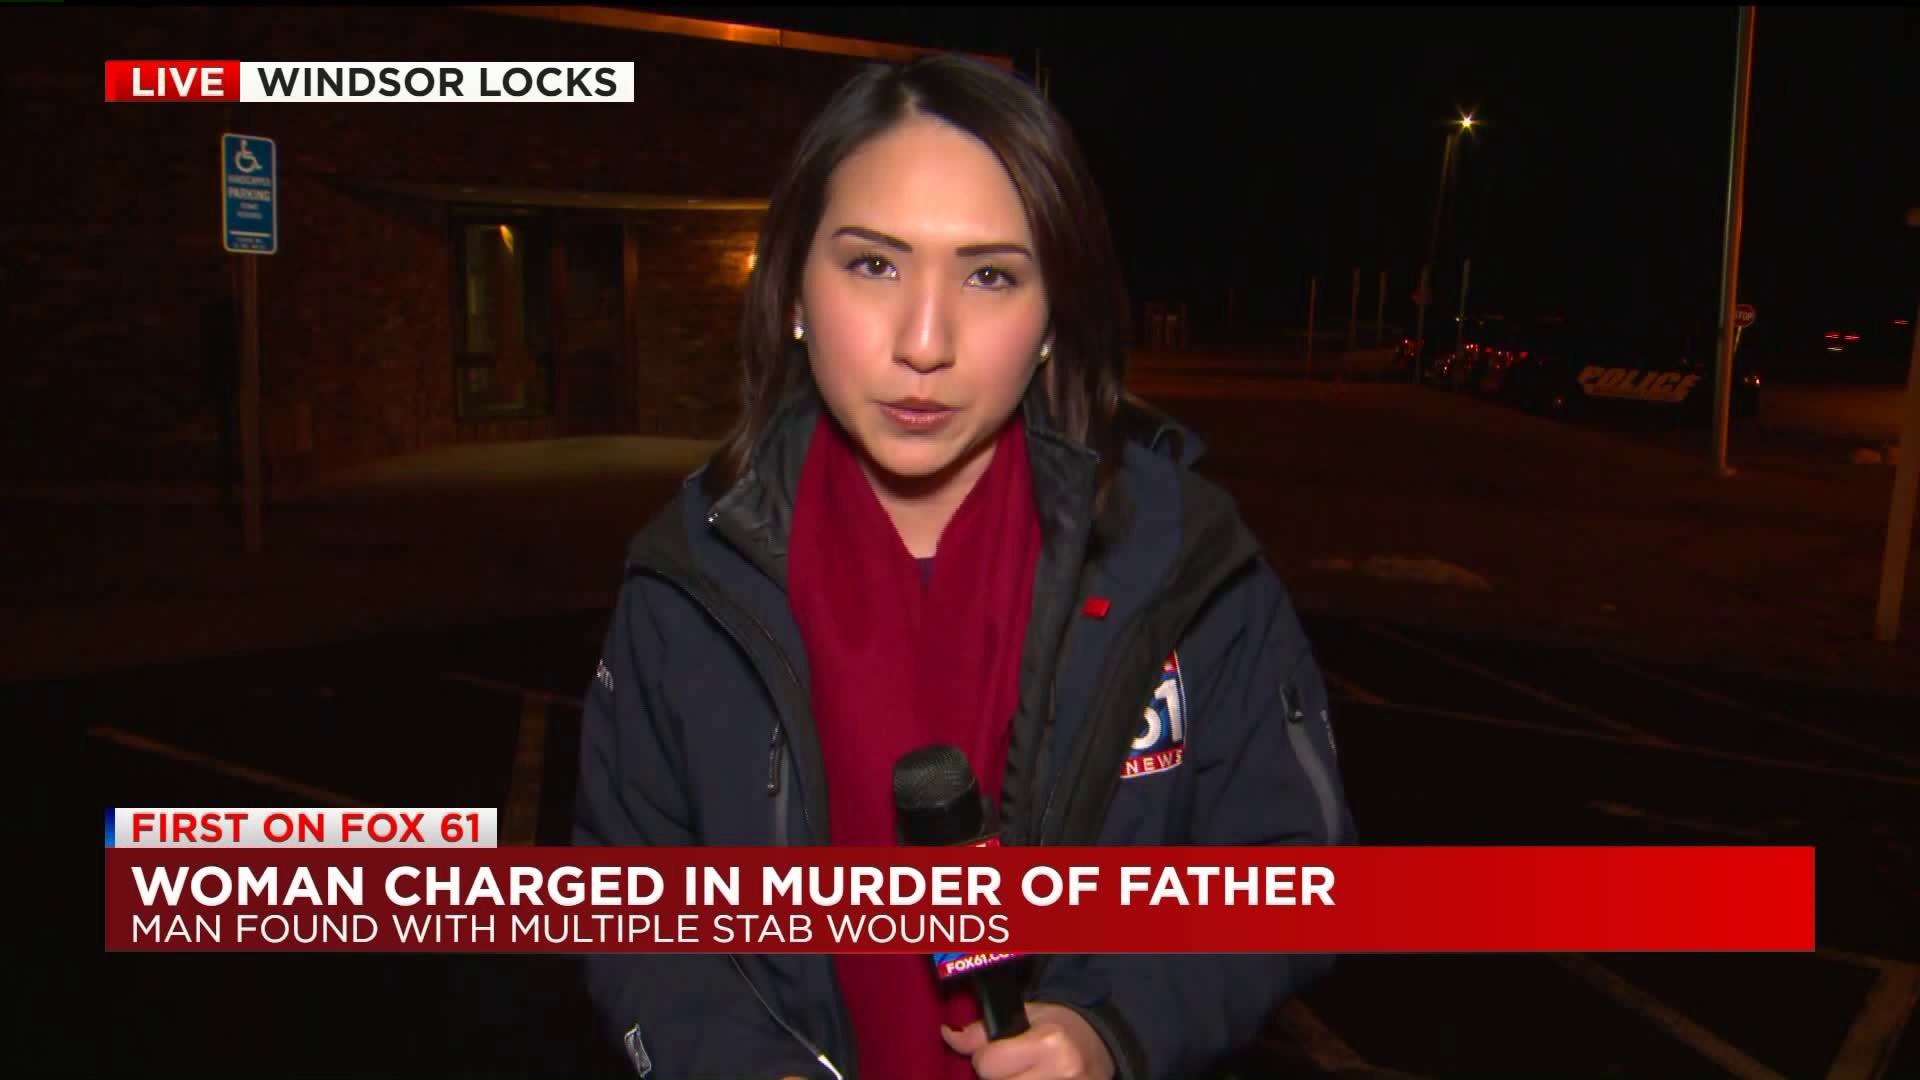 First on FOX 61: Woman arrested for murder of father in Windsor Locks